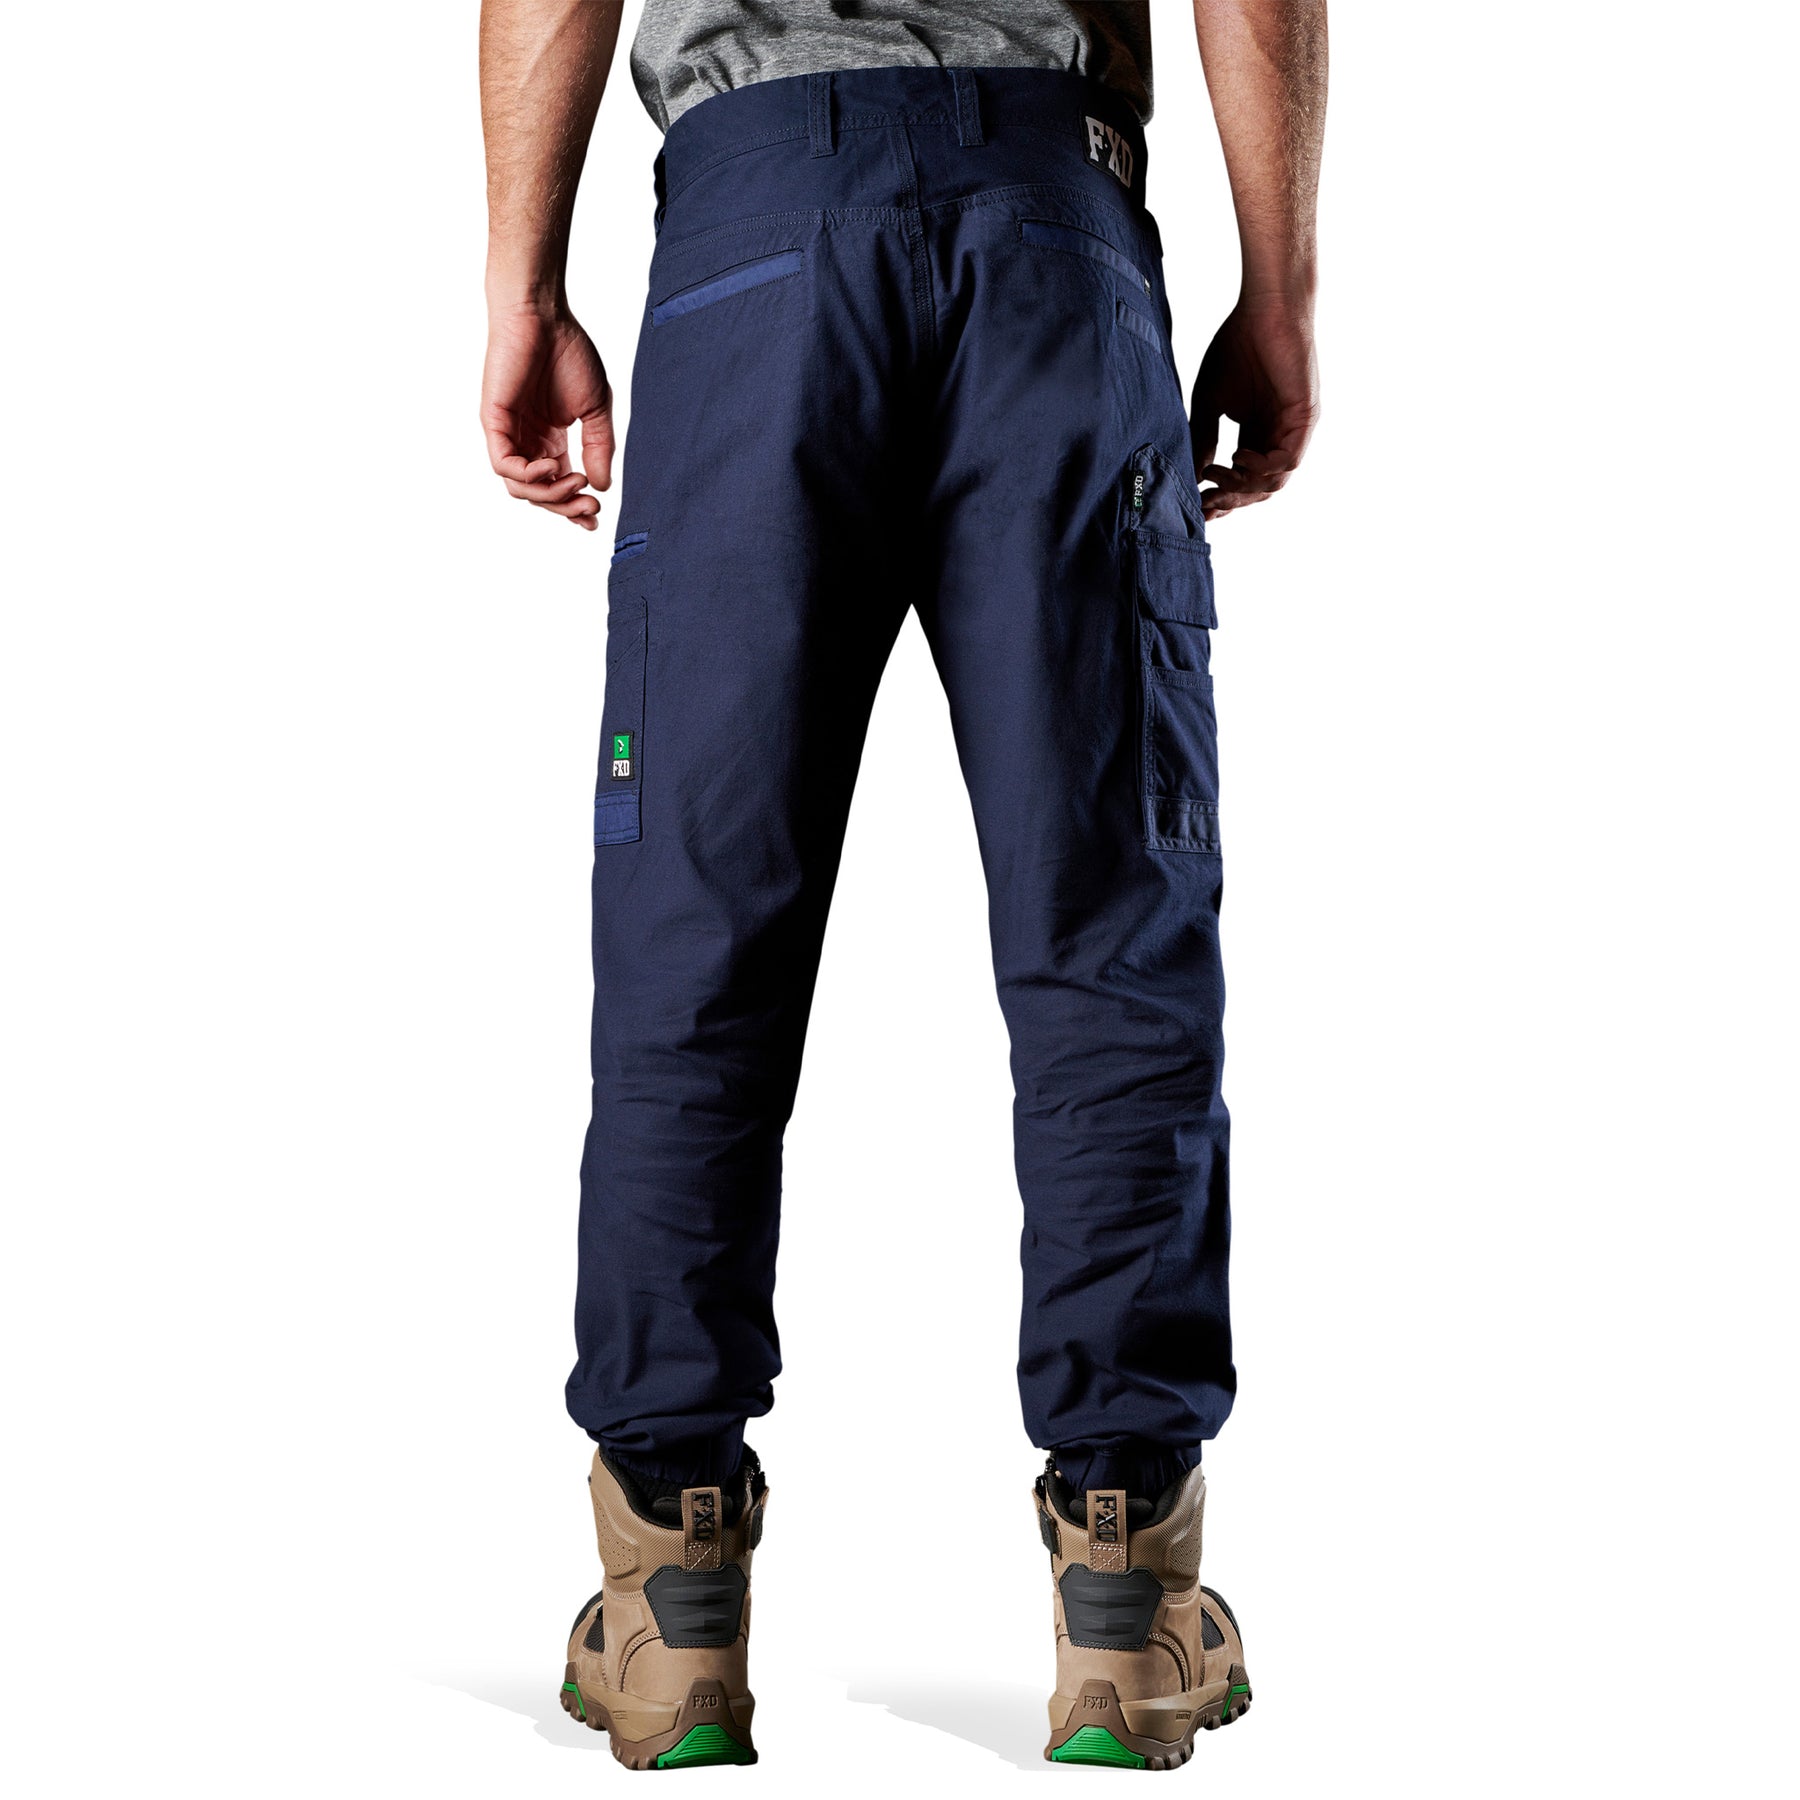 fxd stretch cuffed work pants in navy